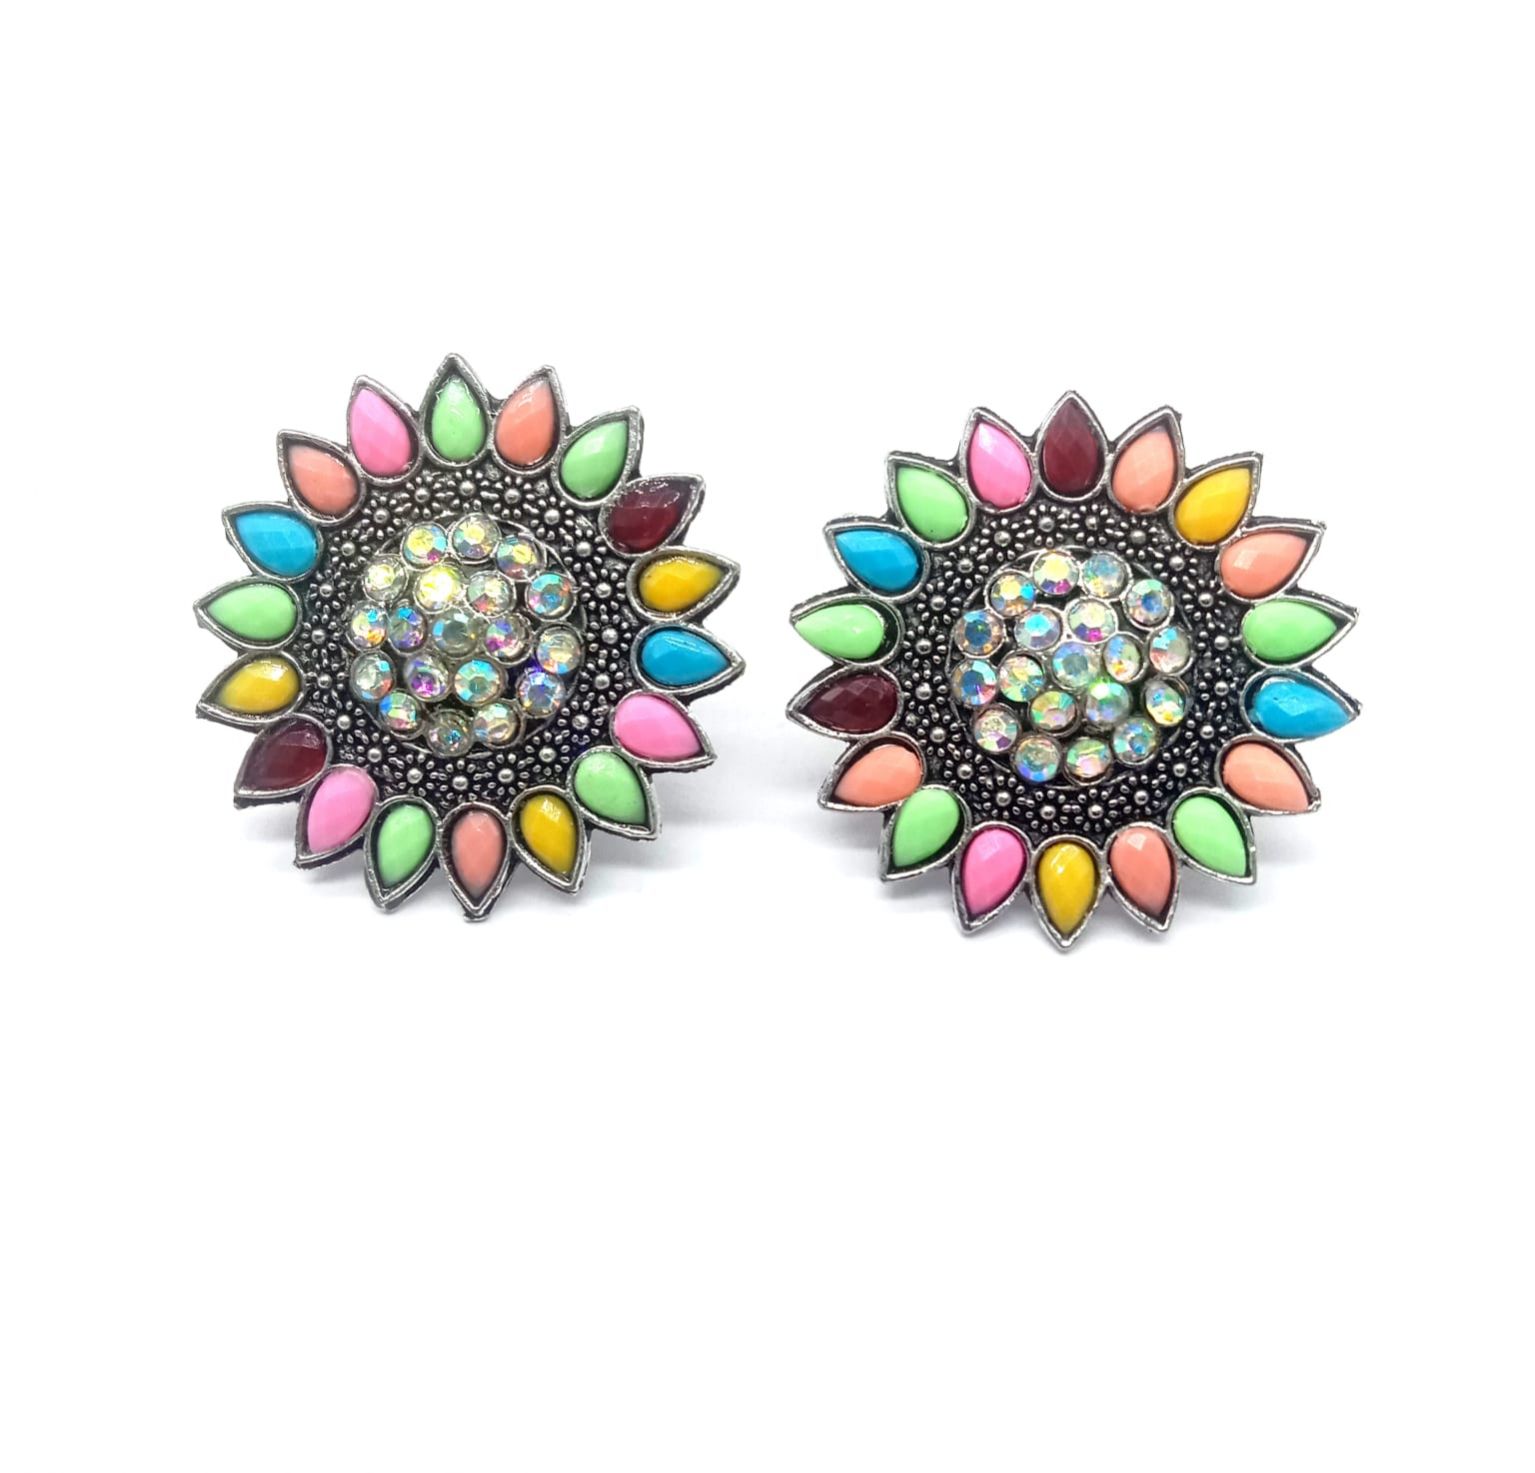 Of Wholesale Fashion Stud Earrings With Artificial Diamonds, Pearl Earrings  Online, And Snow Sun And Stars Design For Women From Melody2041, $1.96 |  DHgate.Com